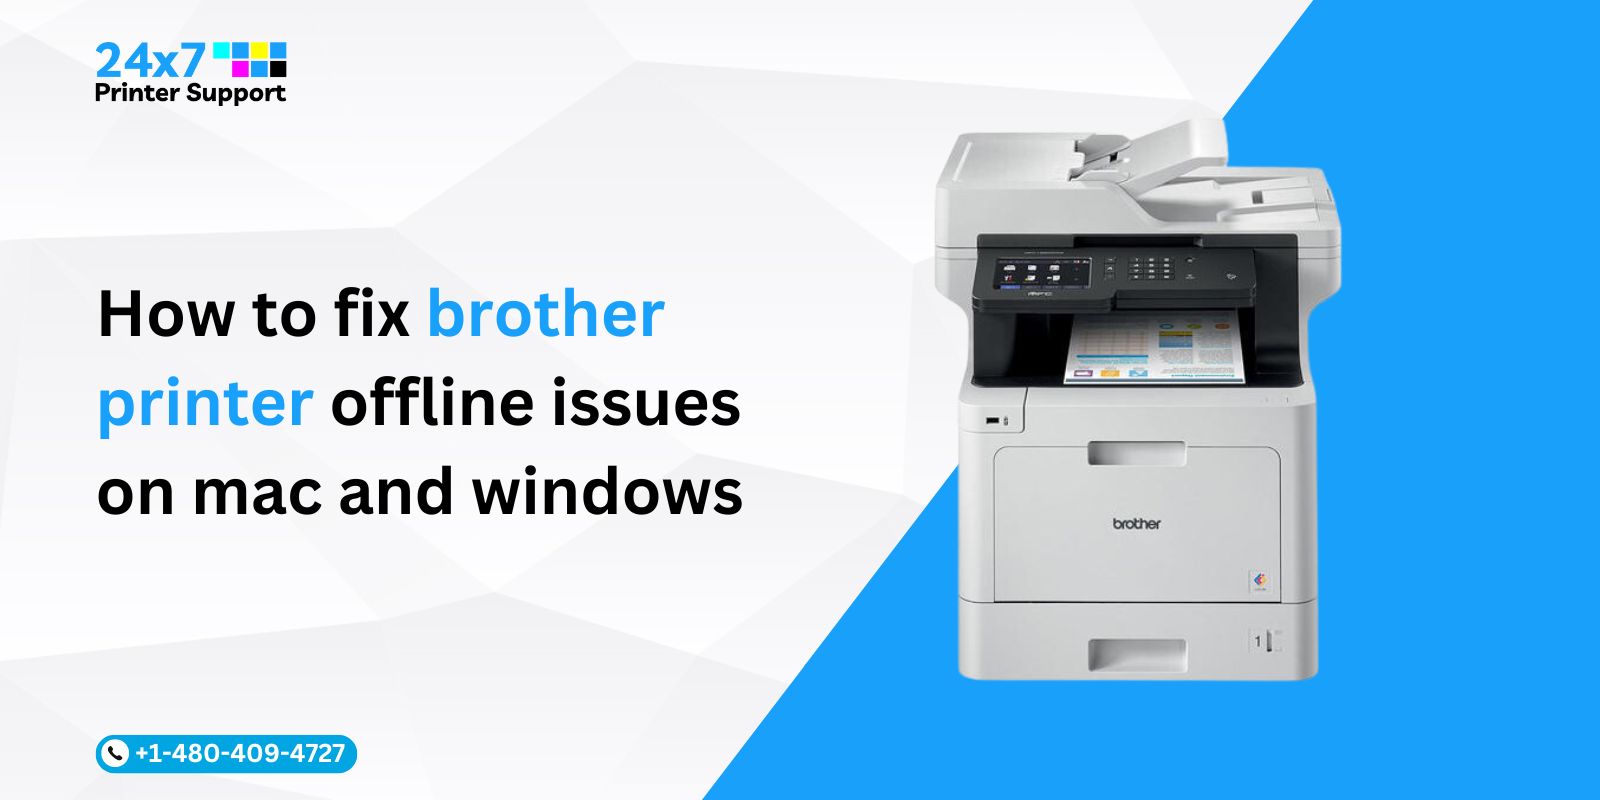 How to fix Brother printer offline issues on Mac and Windows